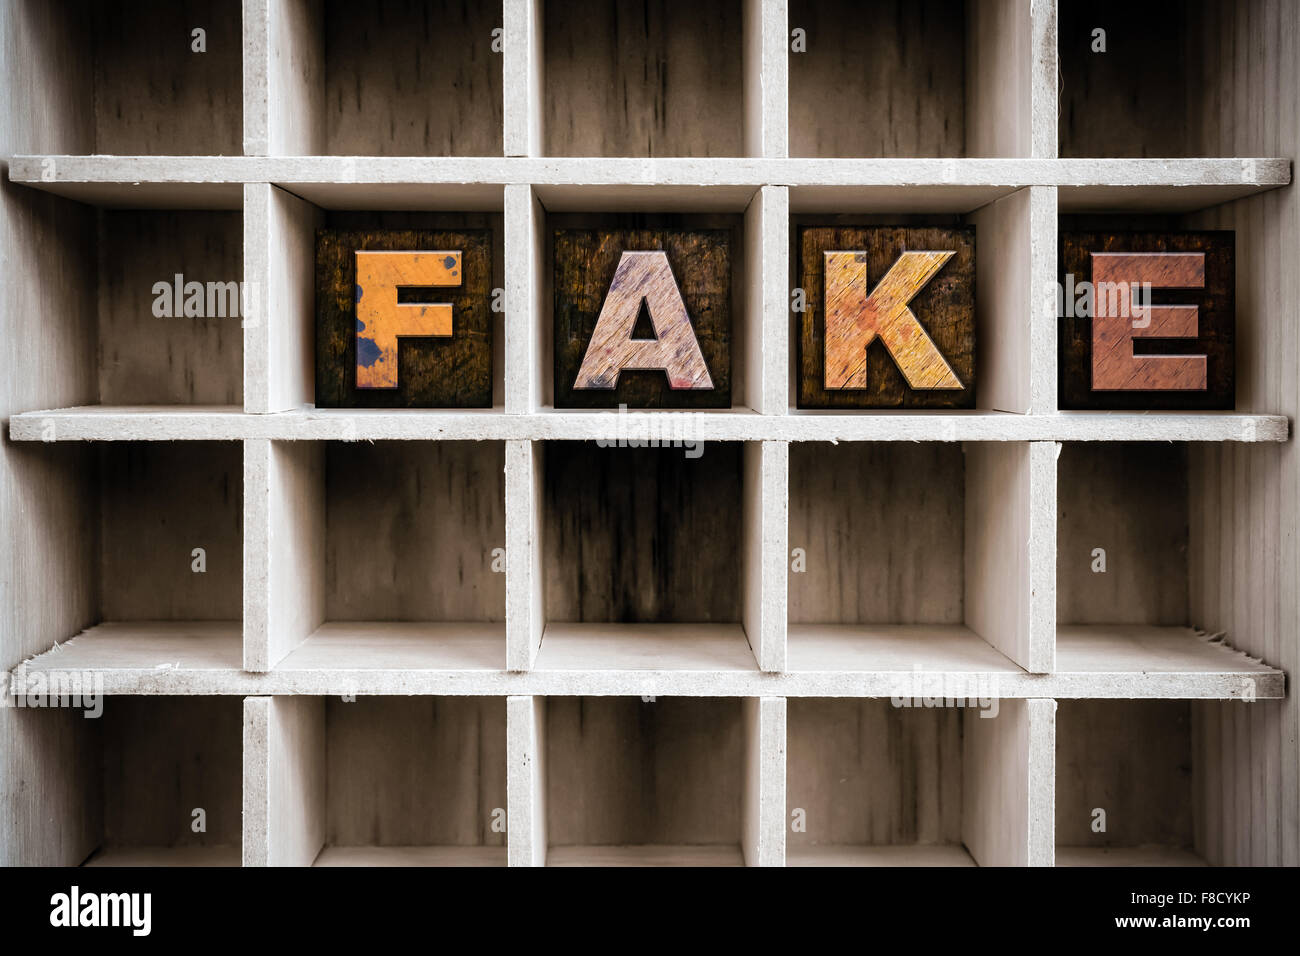 The word "FAKE" written in vintage ink stained wooden letterpress type in a partitioned printer's drawer. Stock Photo